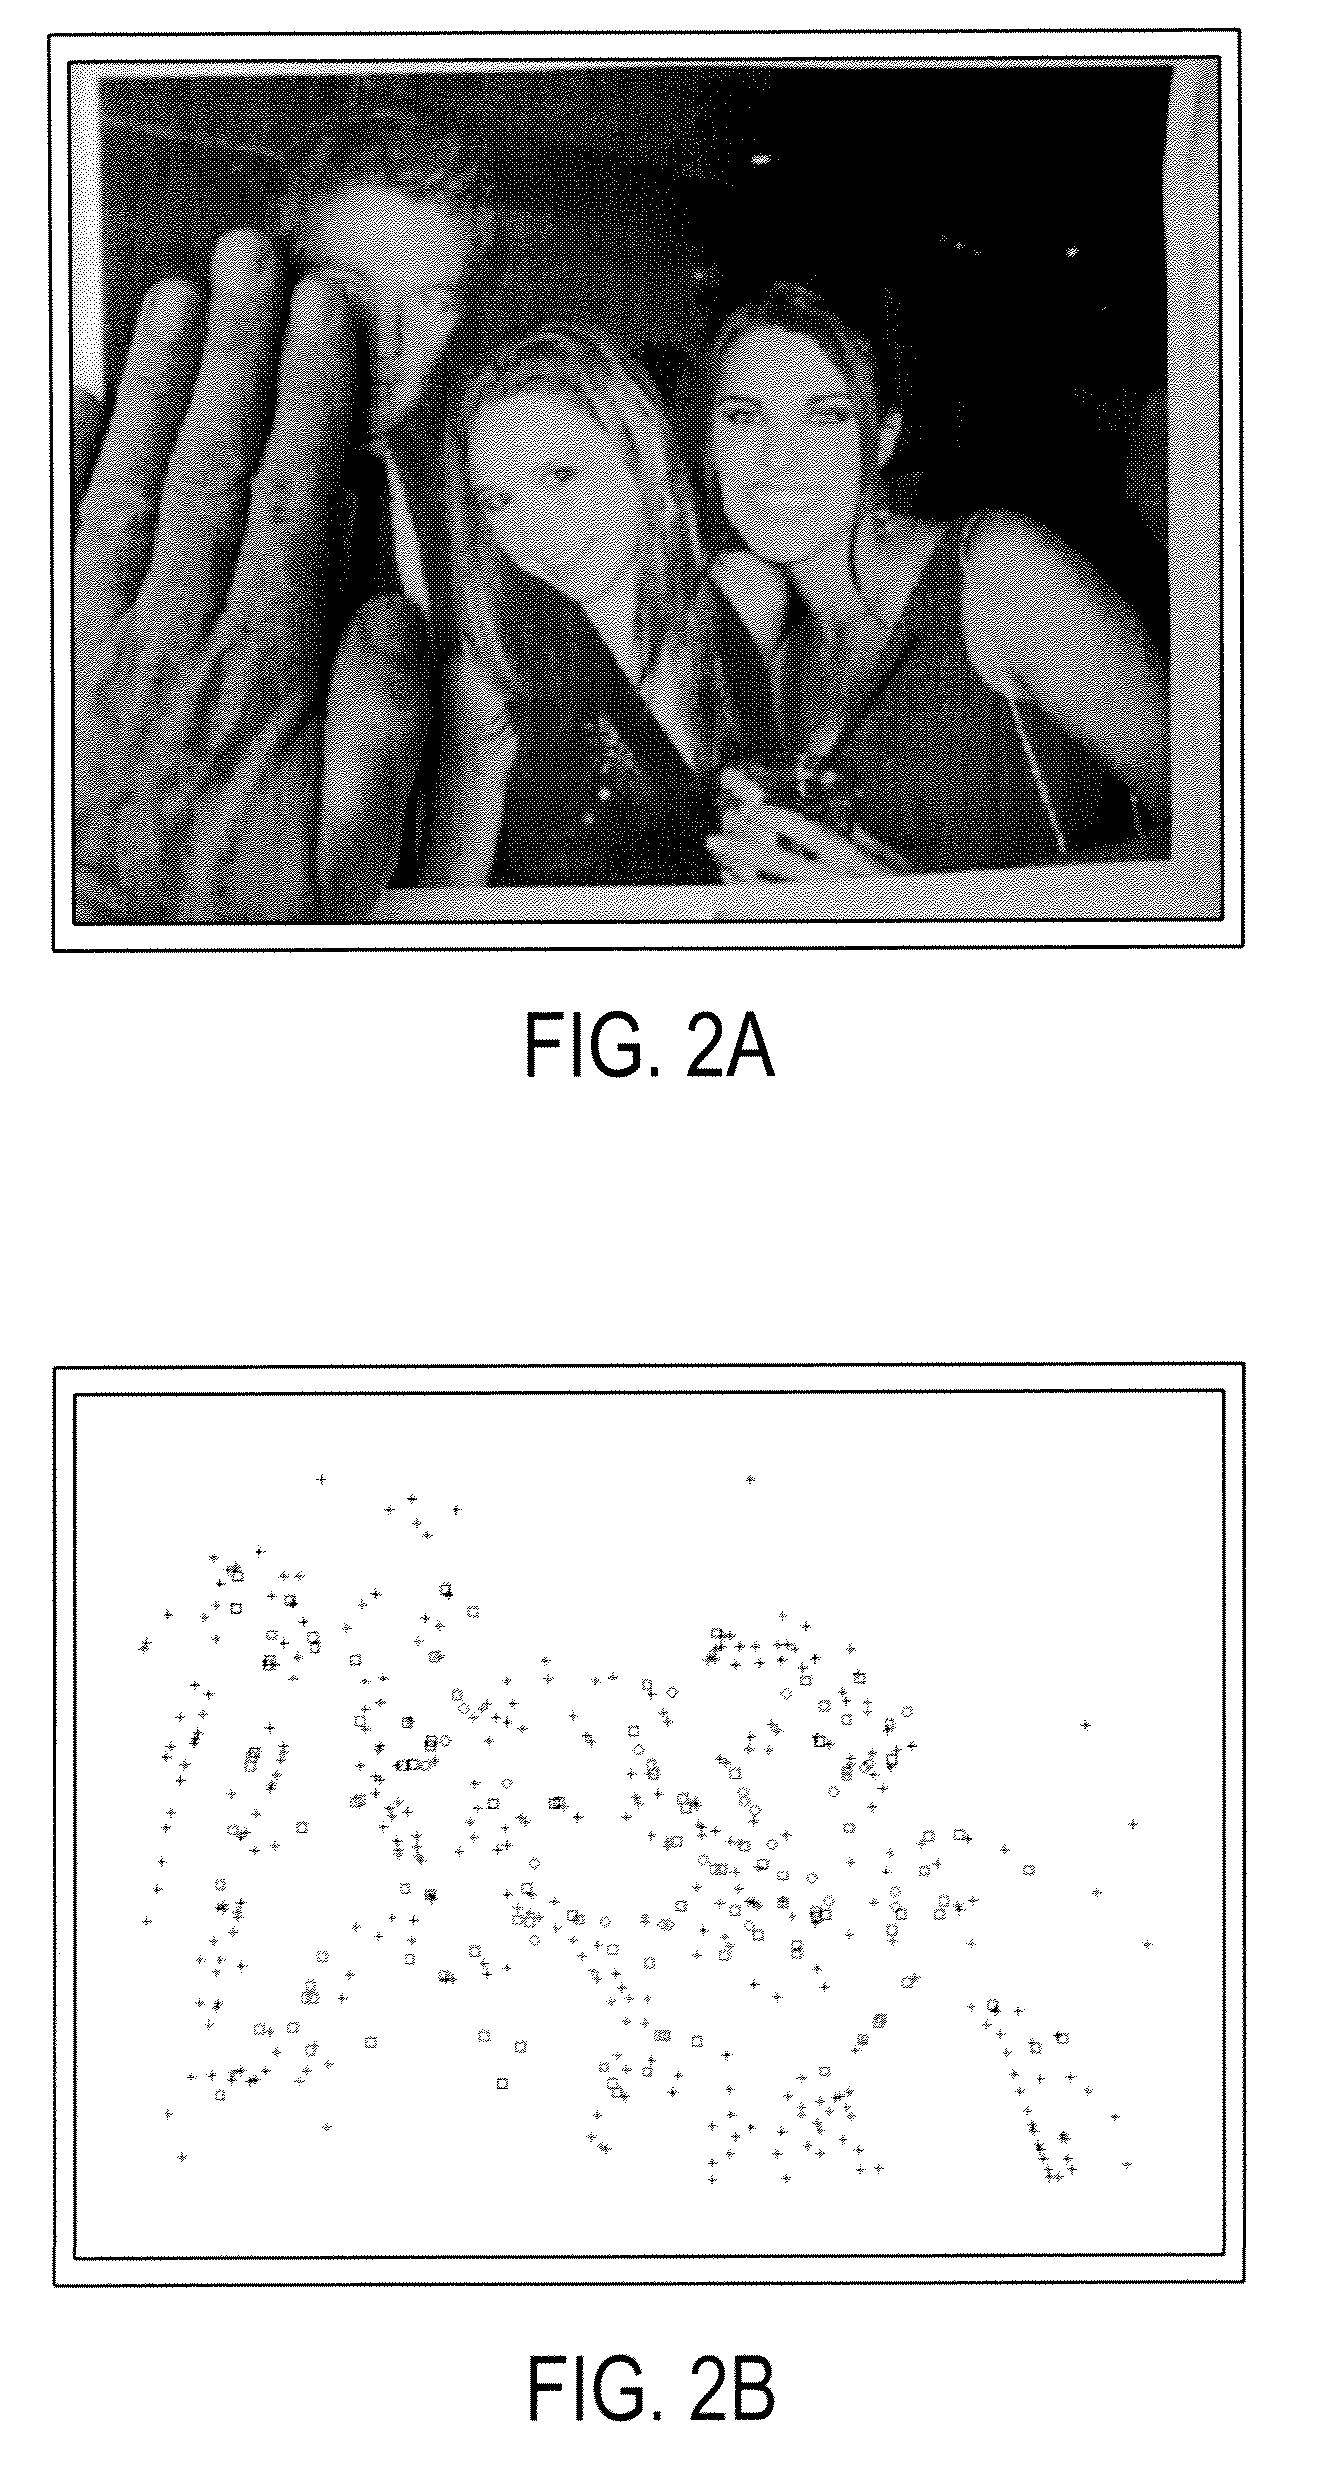 System and method for finding a picture image in an image collection using localized two-dimensional visual fingerprints